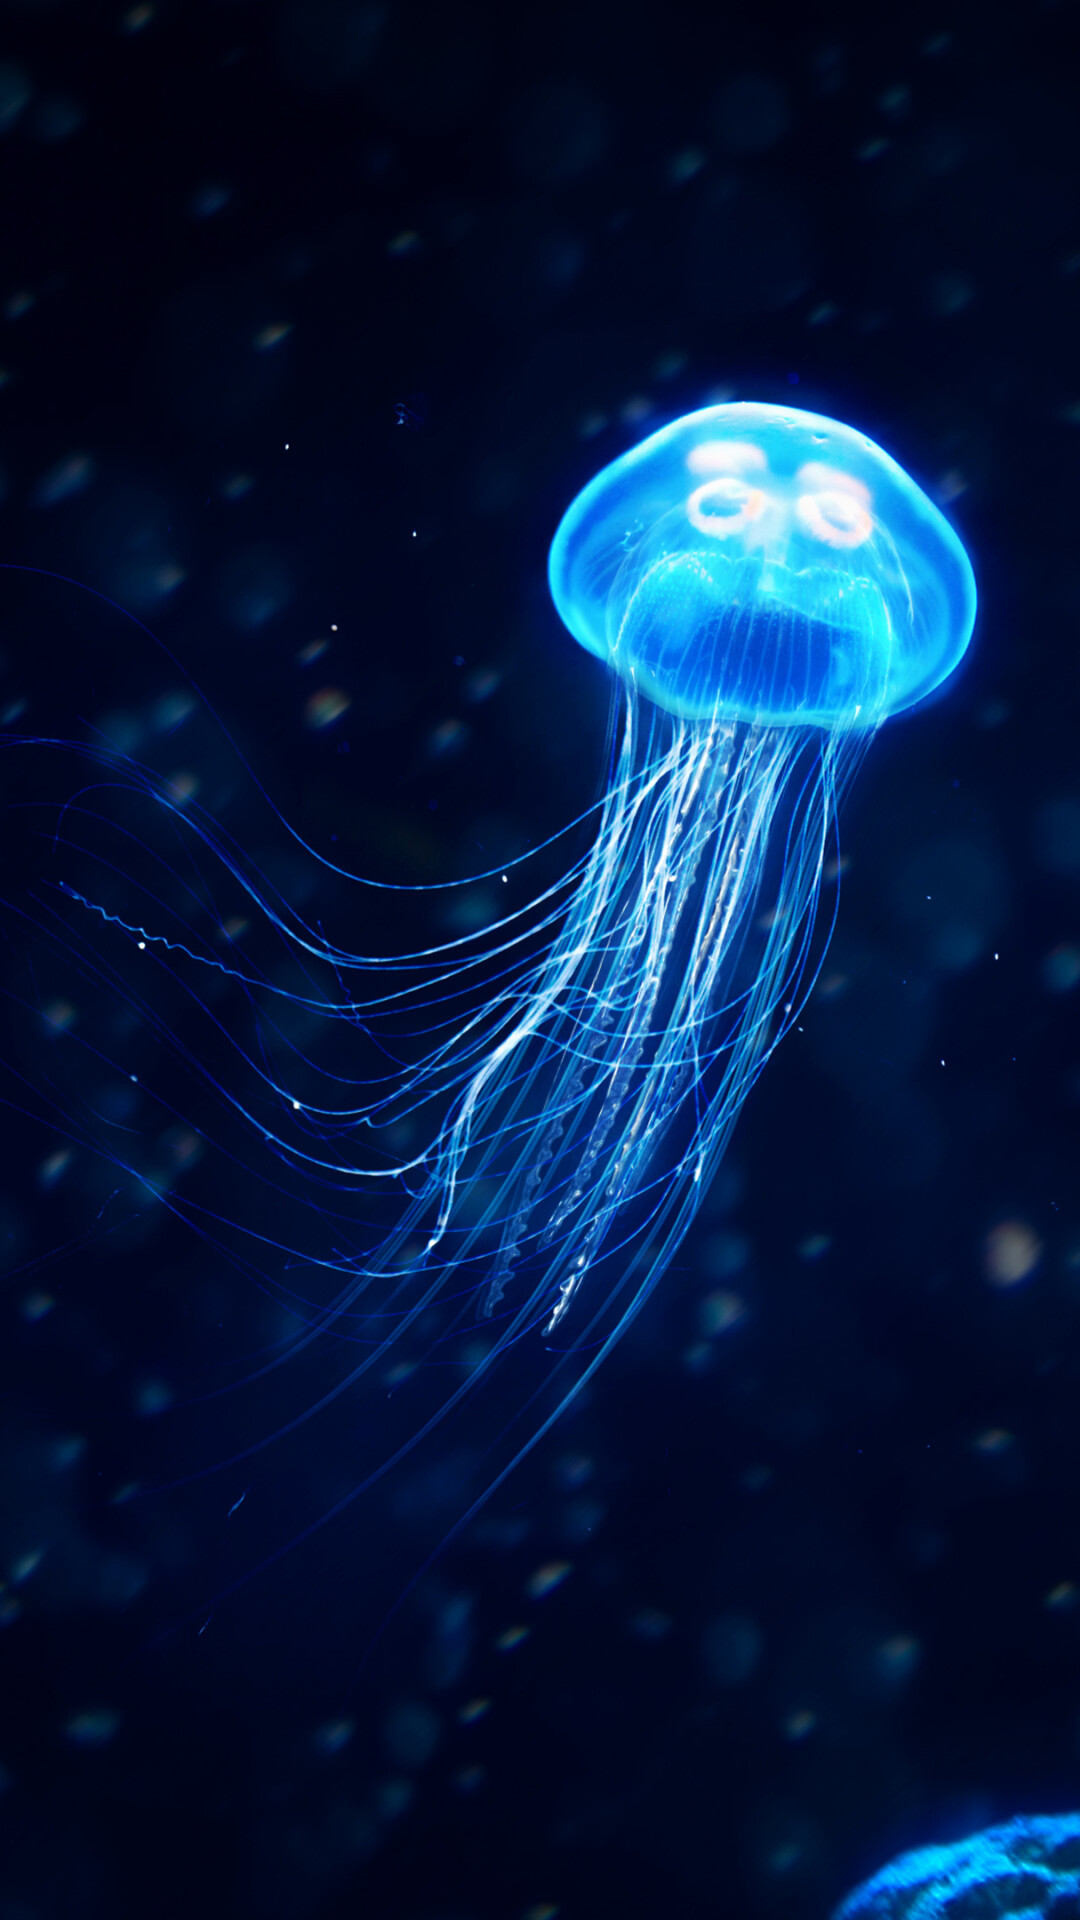 Glowing Jellyfish: Glowing marine animal with umbrella-shaped bells and trailing tentacles, A nearly transparent saucer-shaped body. 1080x1920 Full HD Background.